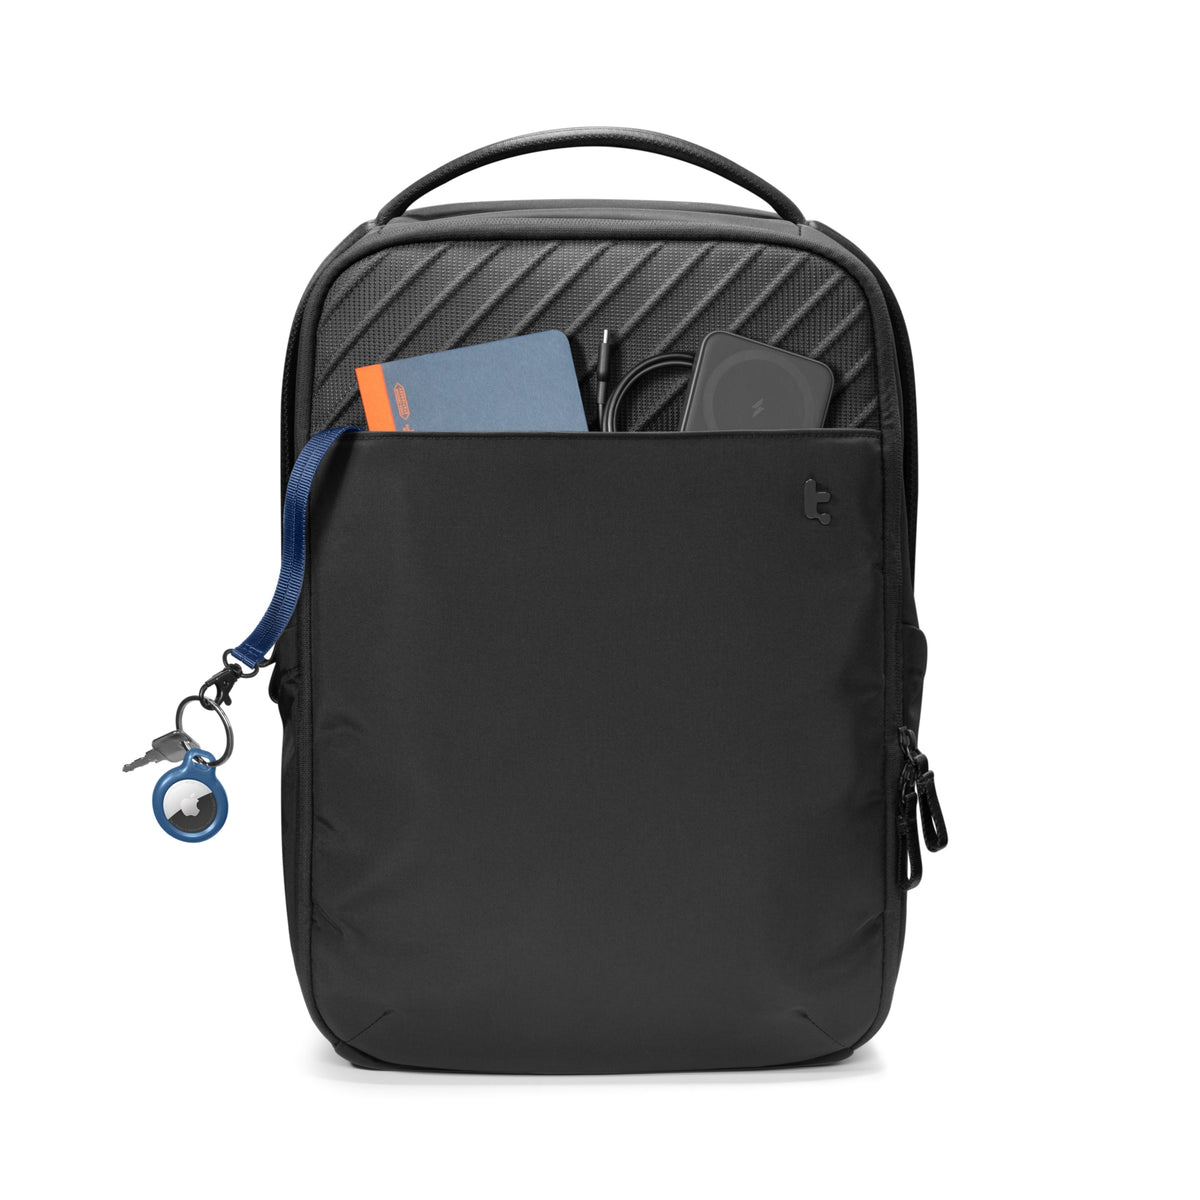 Buy Dell Laptop Backpack for 39.62 cm (15.6 inch) Laptop Online at Best  Prices in India - JioMart.